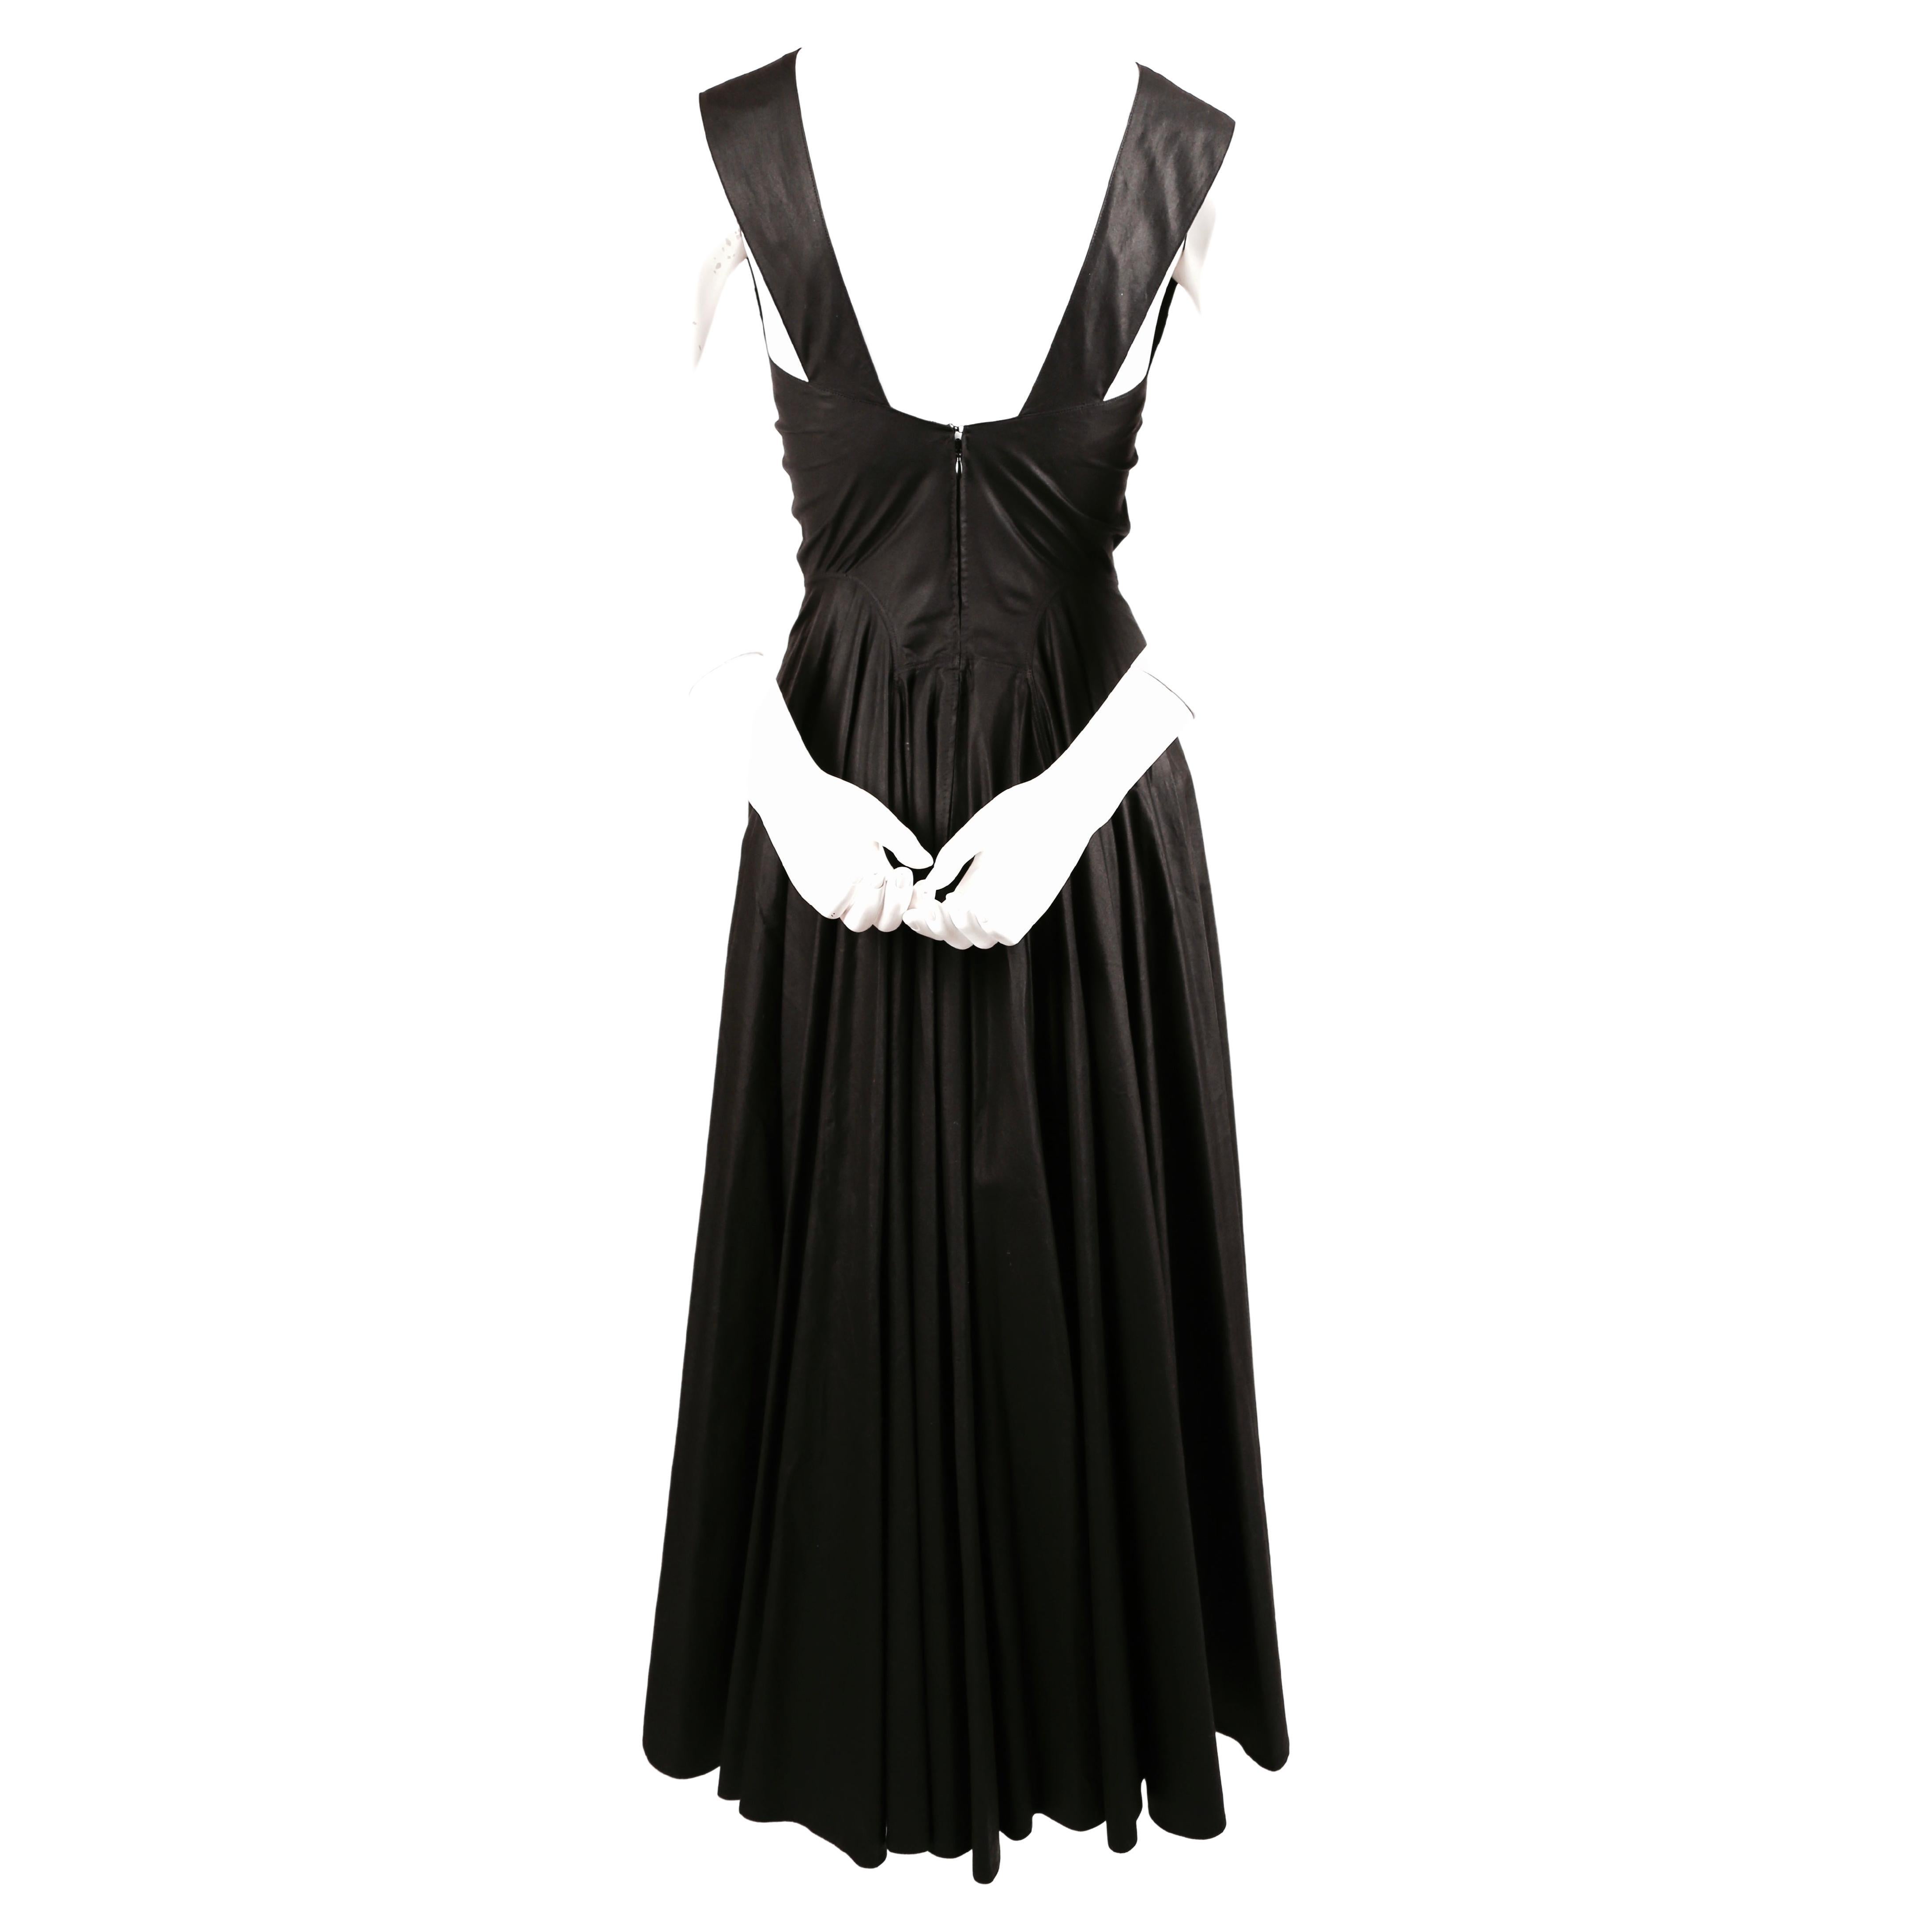 1980's AZZEDINE ALAIA black seamed dress with full skirt For Sale 1